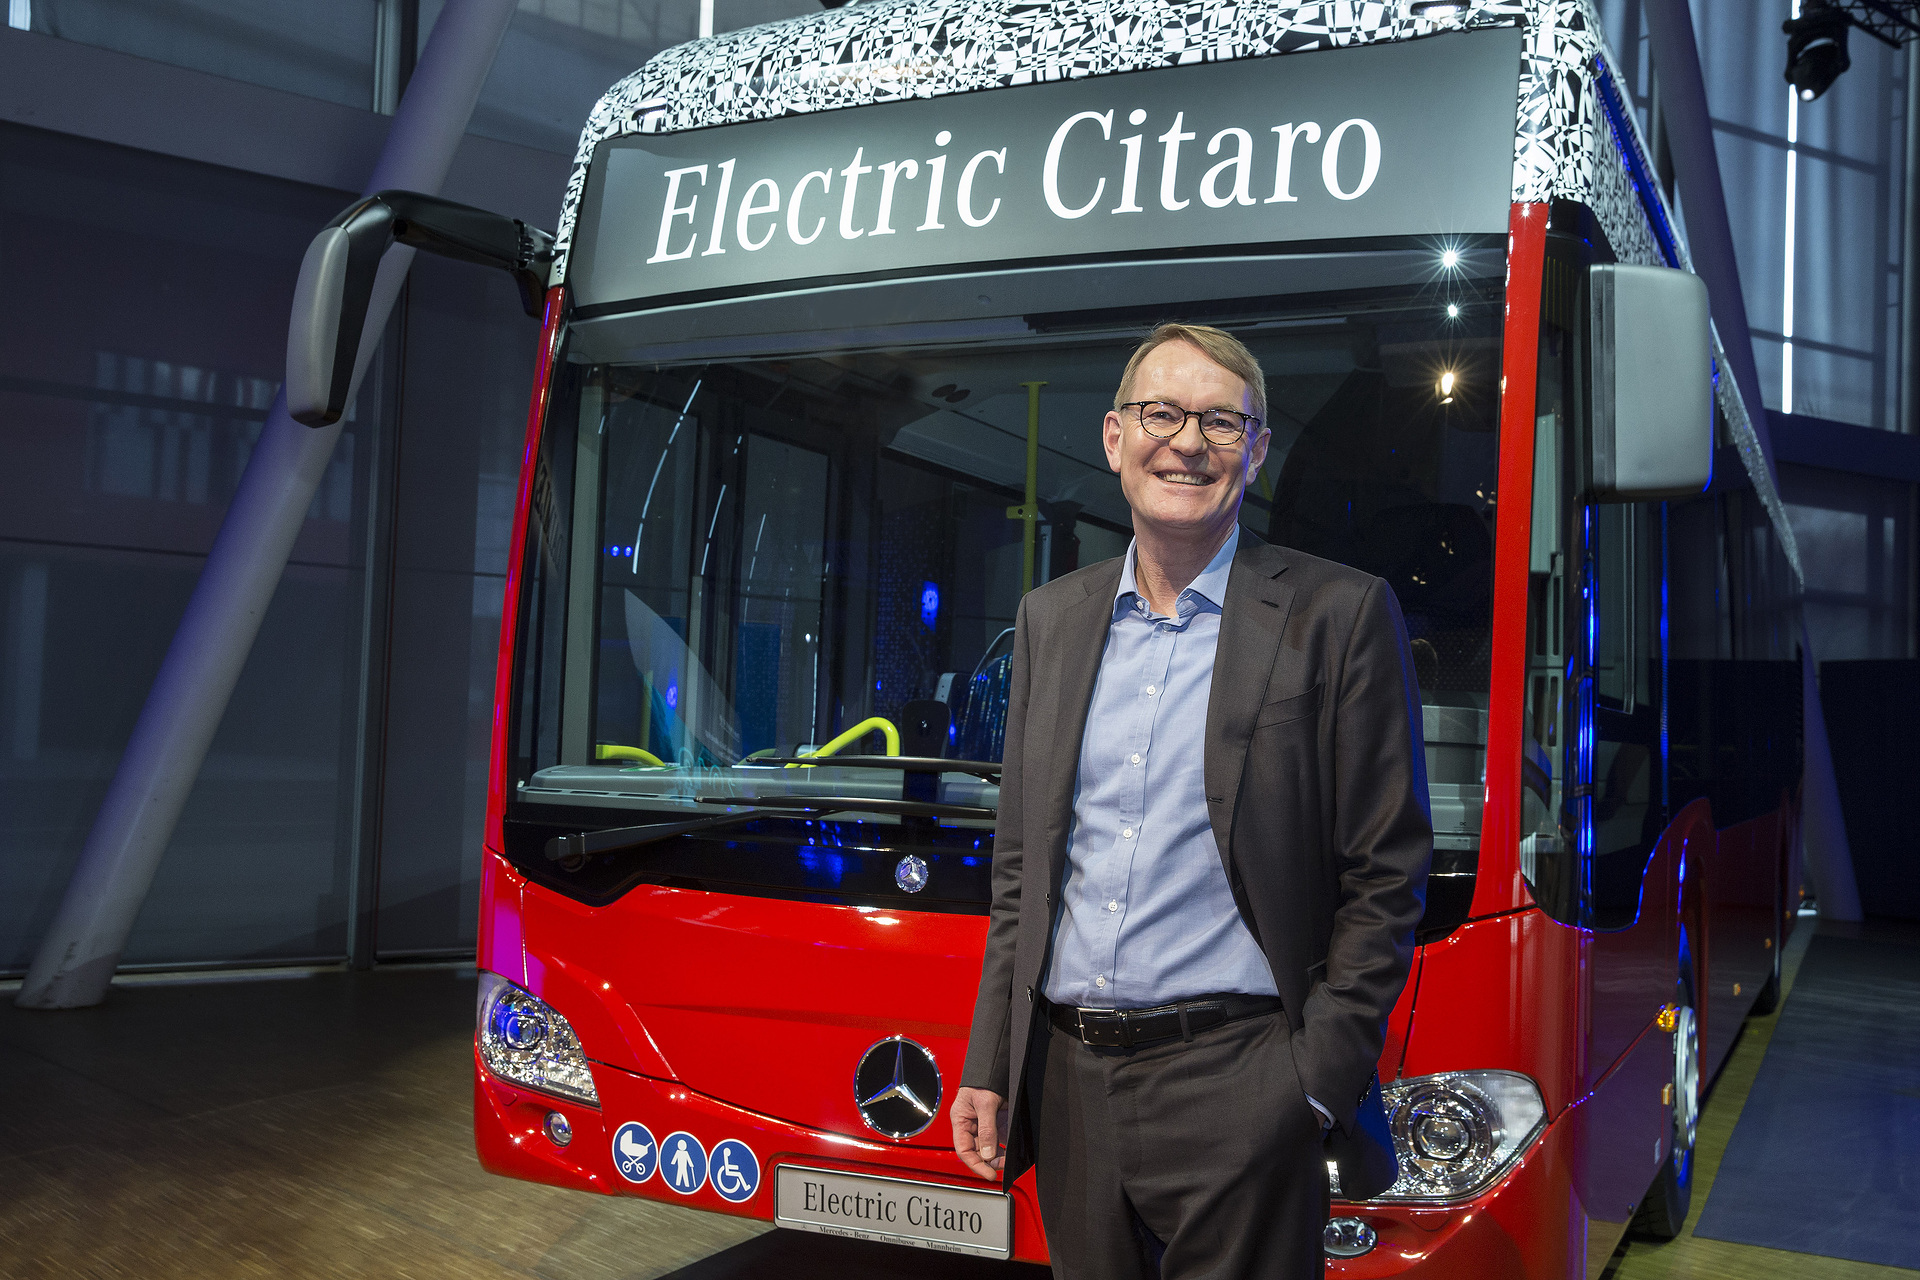 Hartmut Schick, Head of Daimler Buses and Chief Executive of EvoBus GmbH